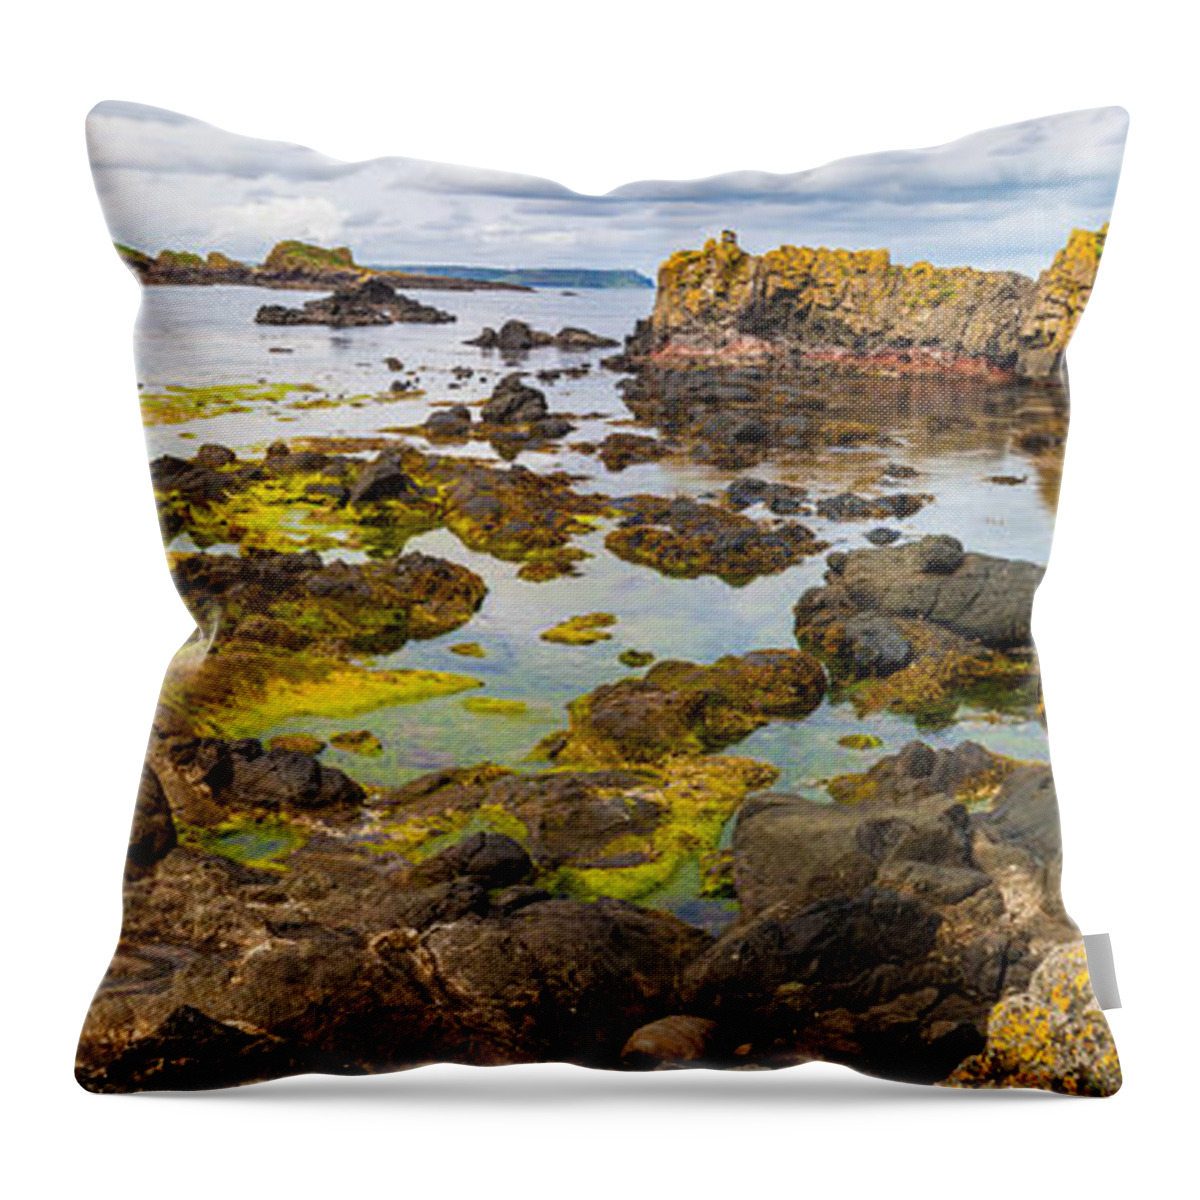 Black Throw Pillow featuring the photograph Ballintoy Bay Basalt Rock #1 by Semmick Photo